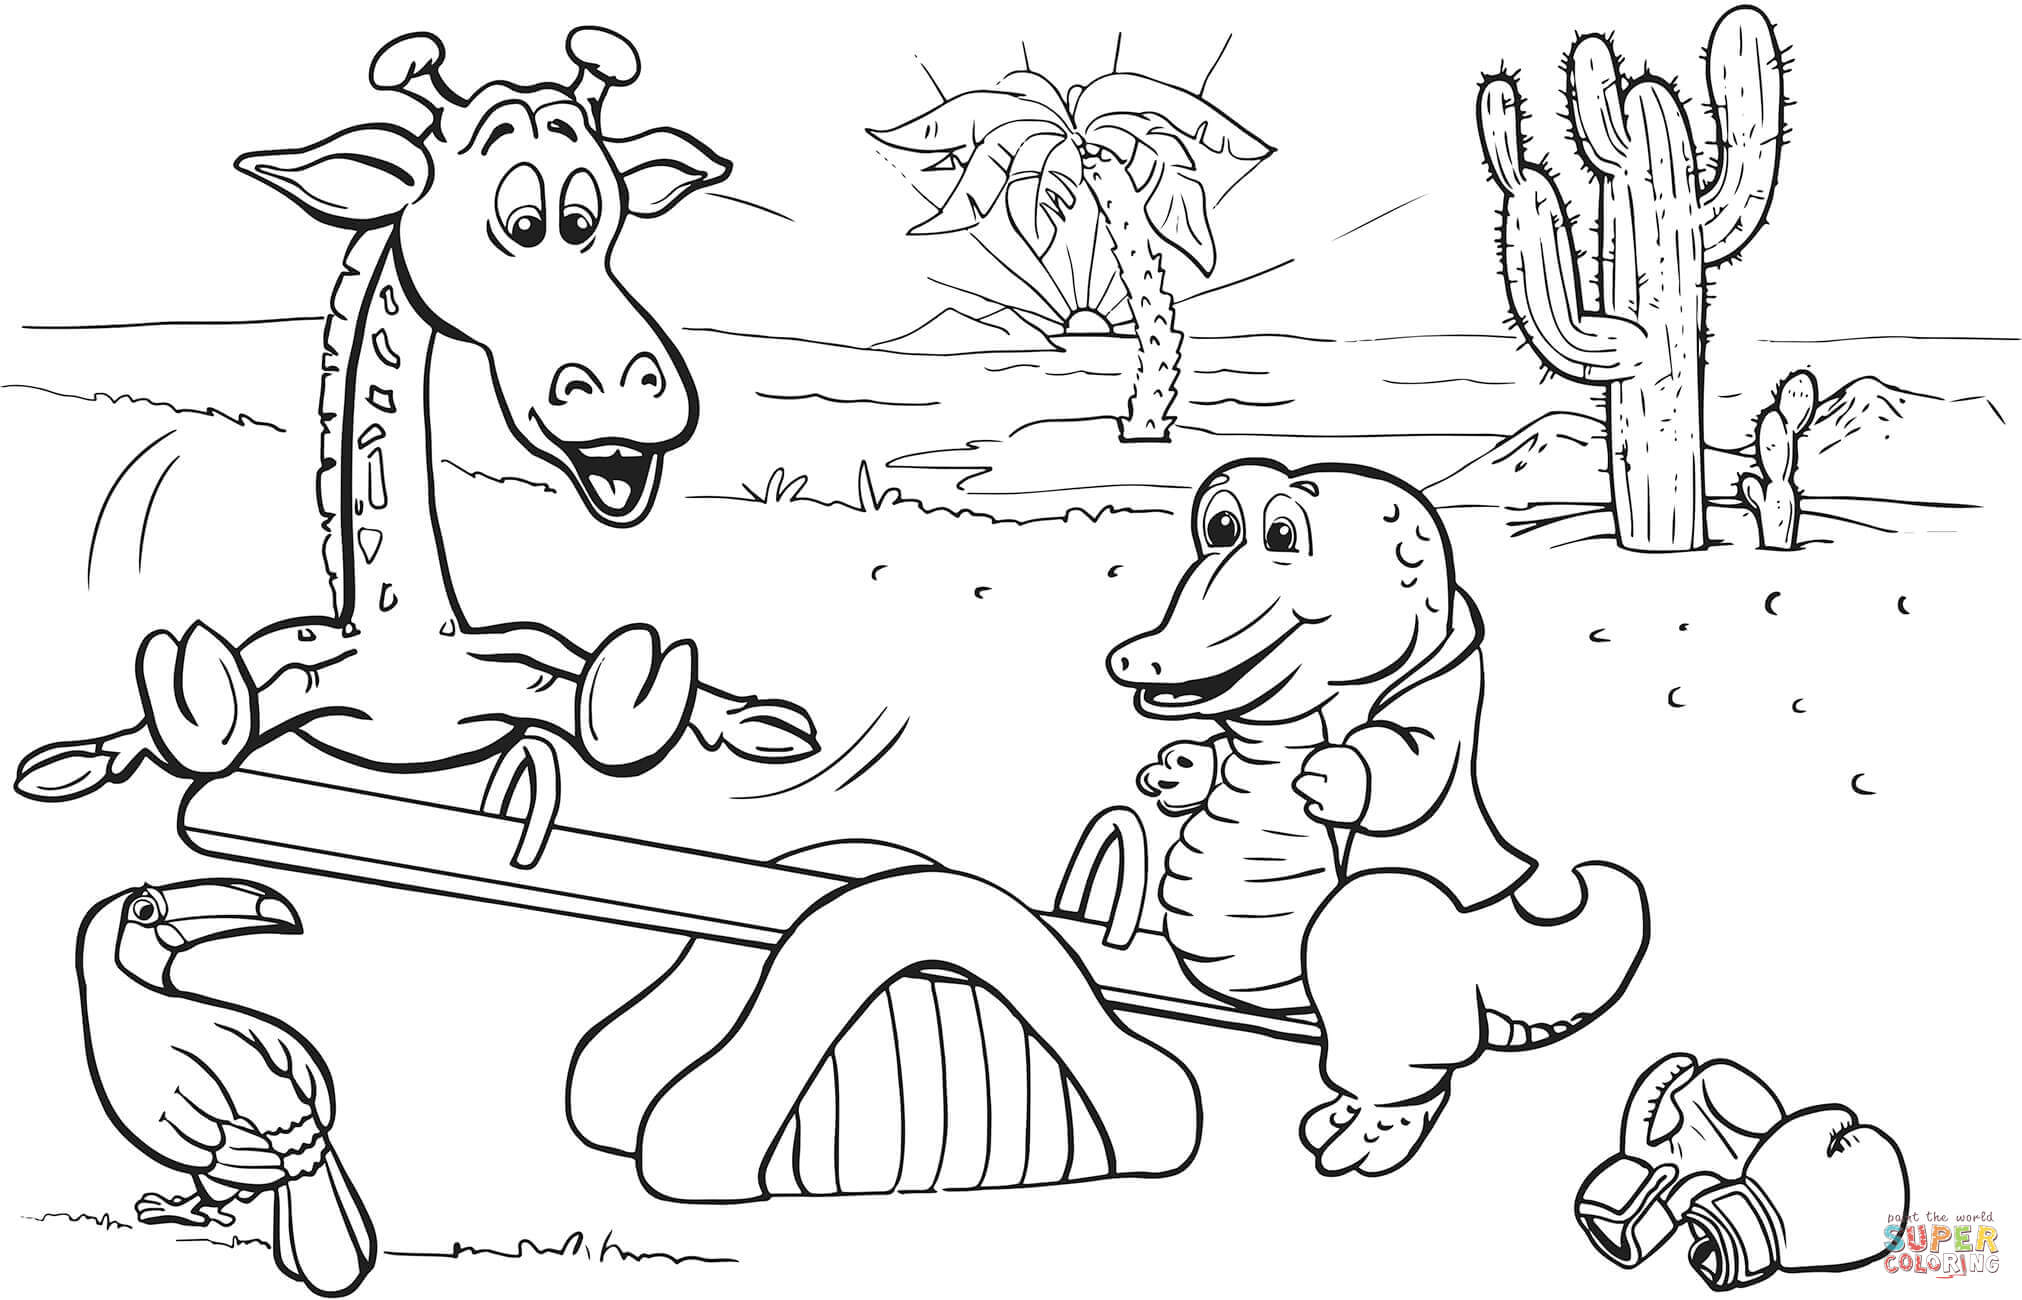 Giraffe and Crocodile on the Playground coloring page | Free ...